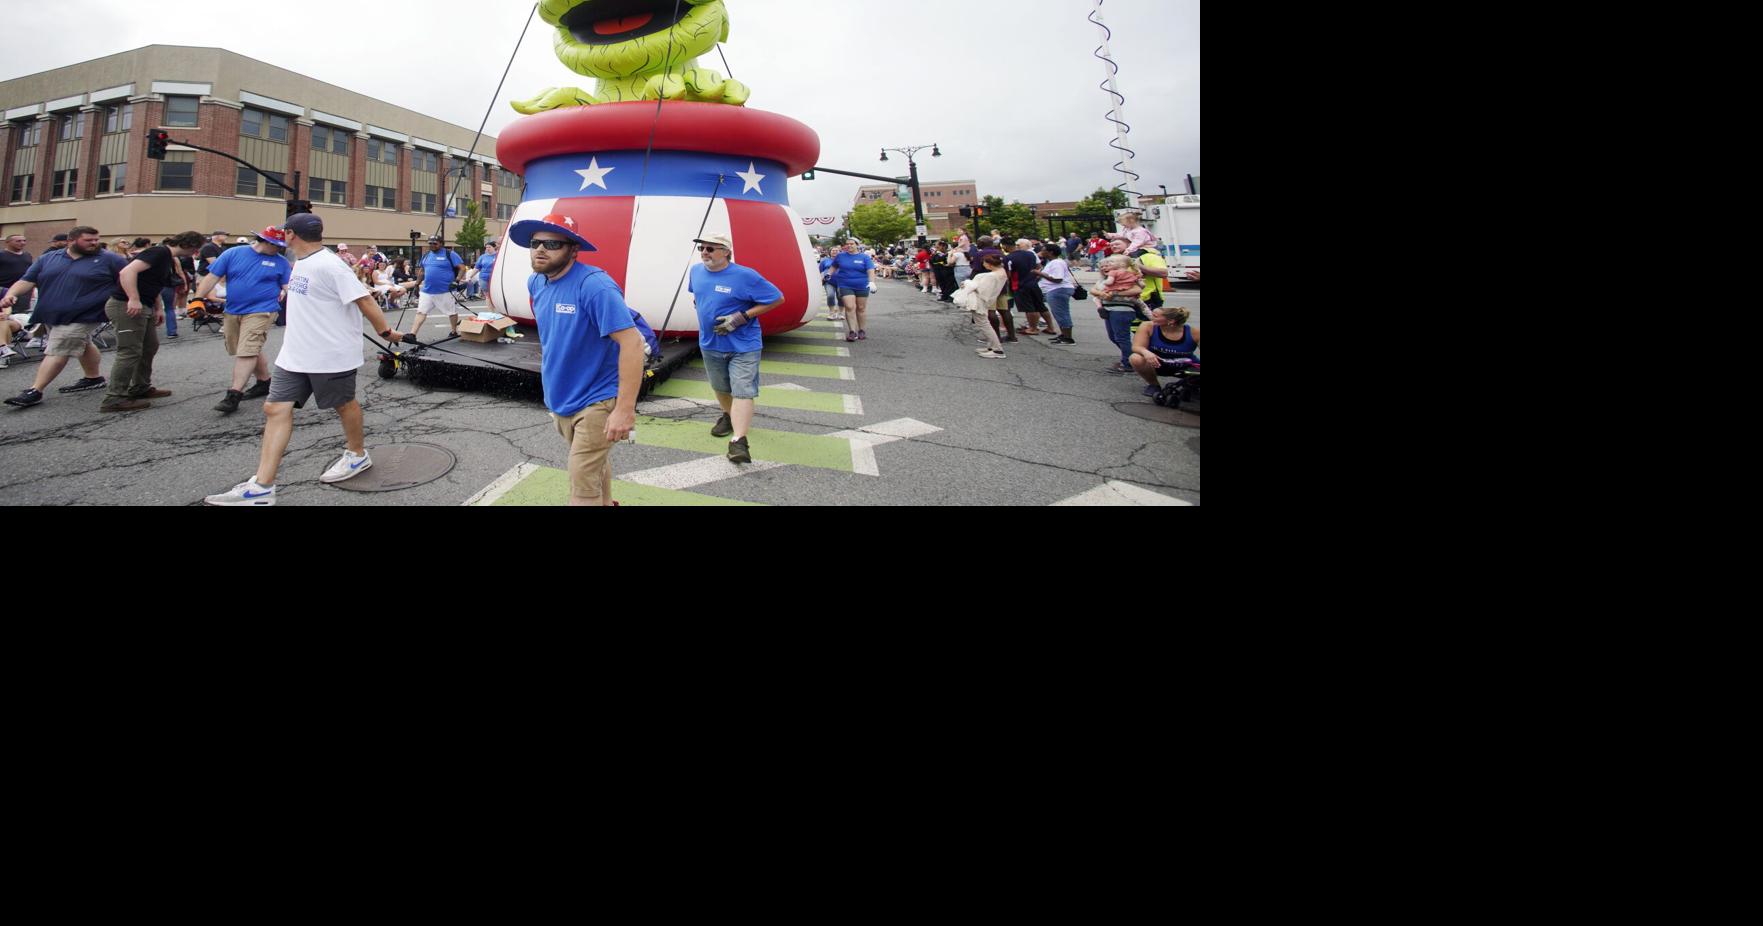 The Pittsfield 4th of July Parade is a family tradition for many